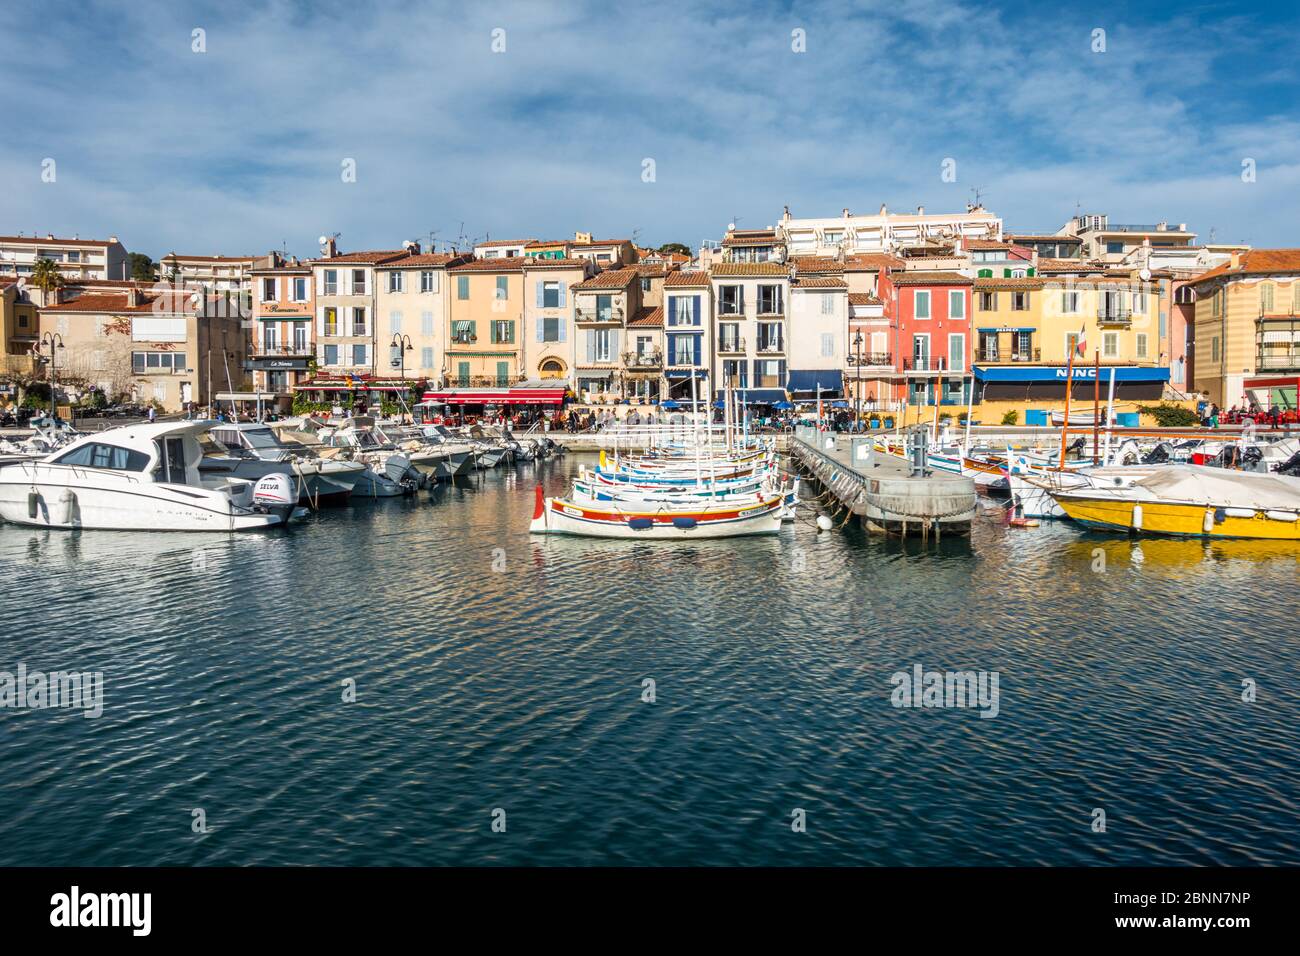 The colorful port of Cassis, a small resort town in Southern France near Marseille. Cassis, France, January 2020 Stock Photo